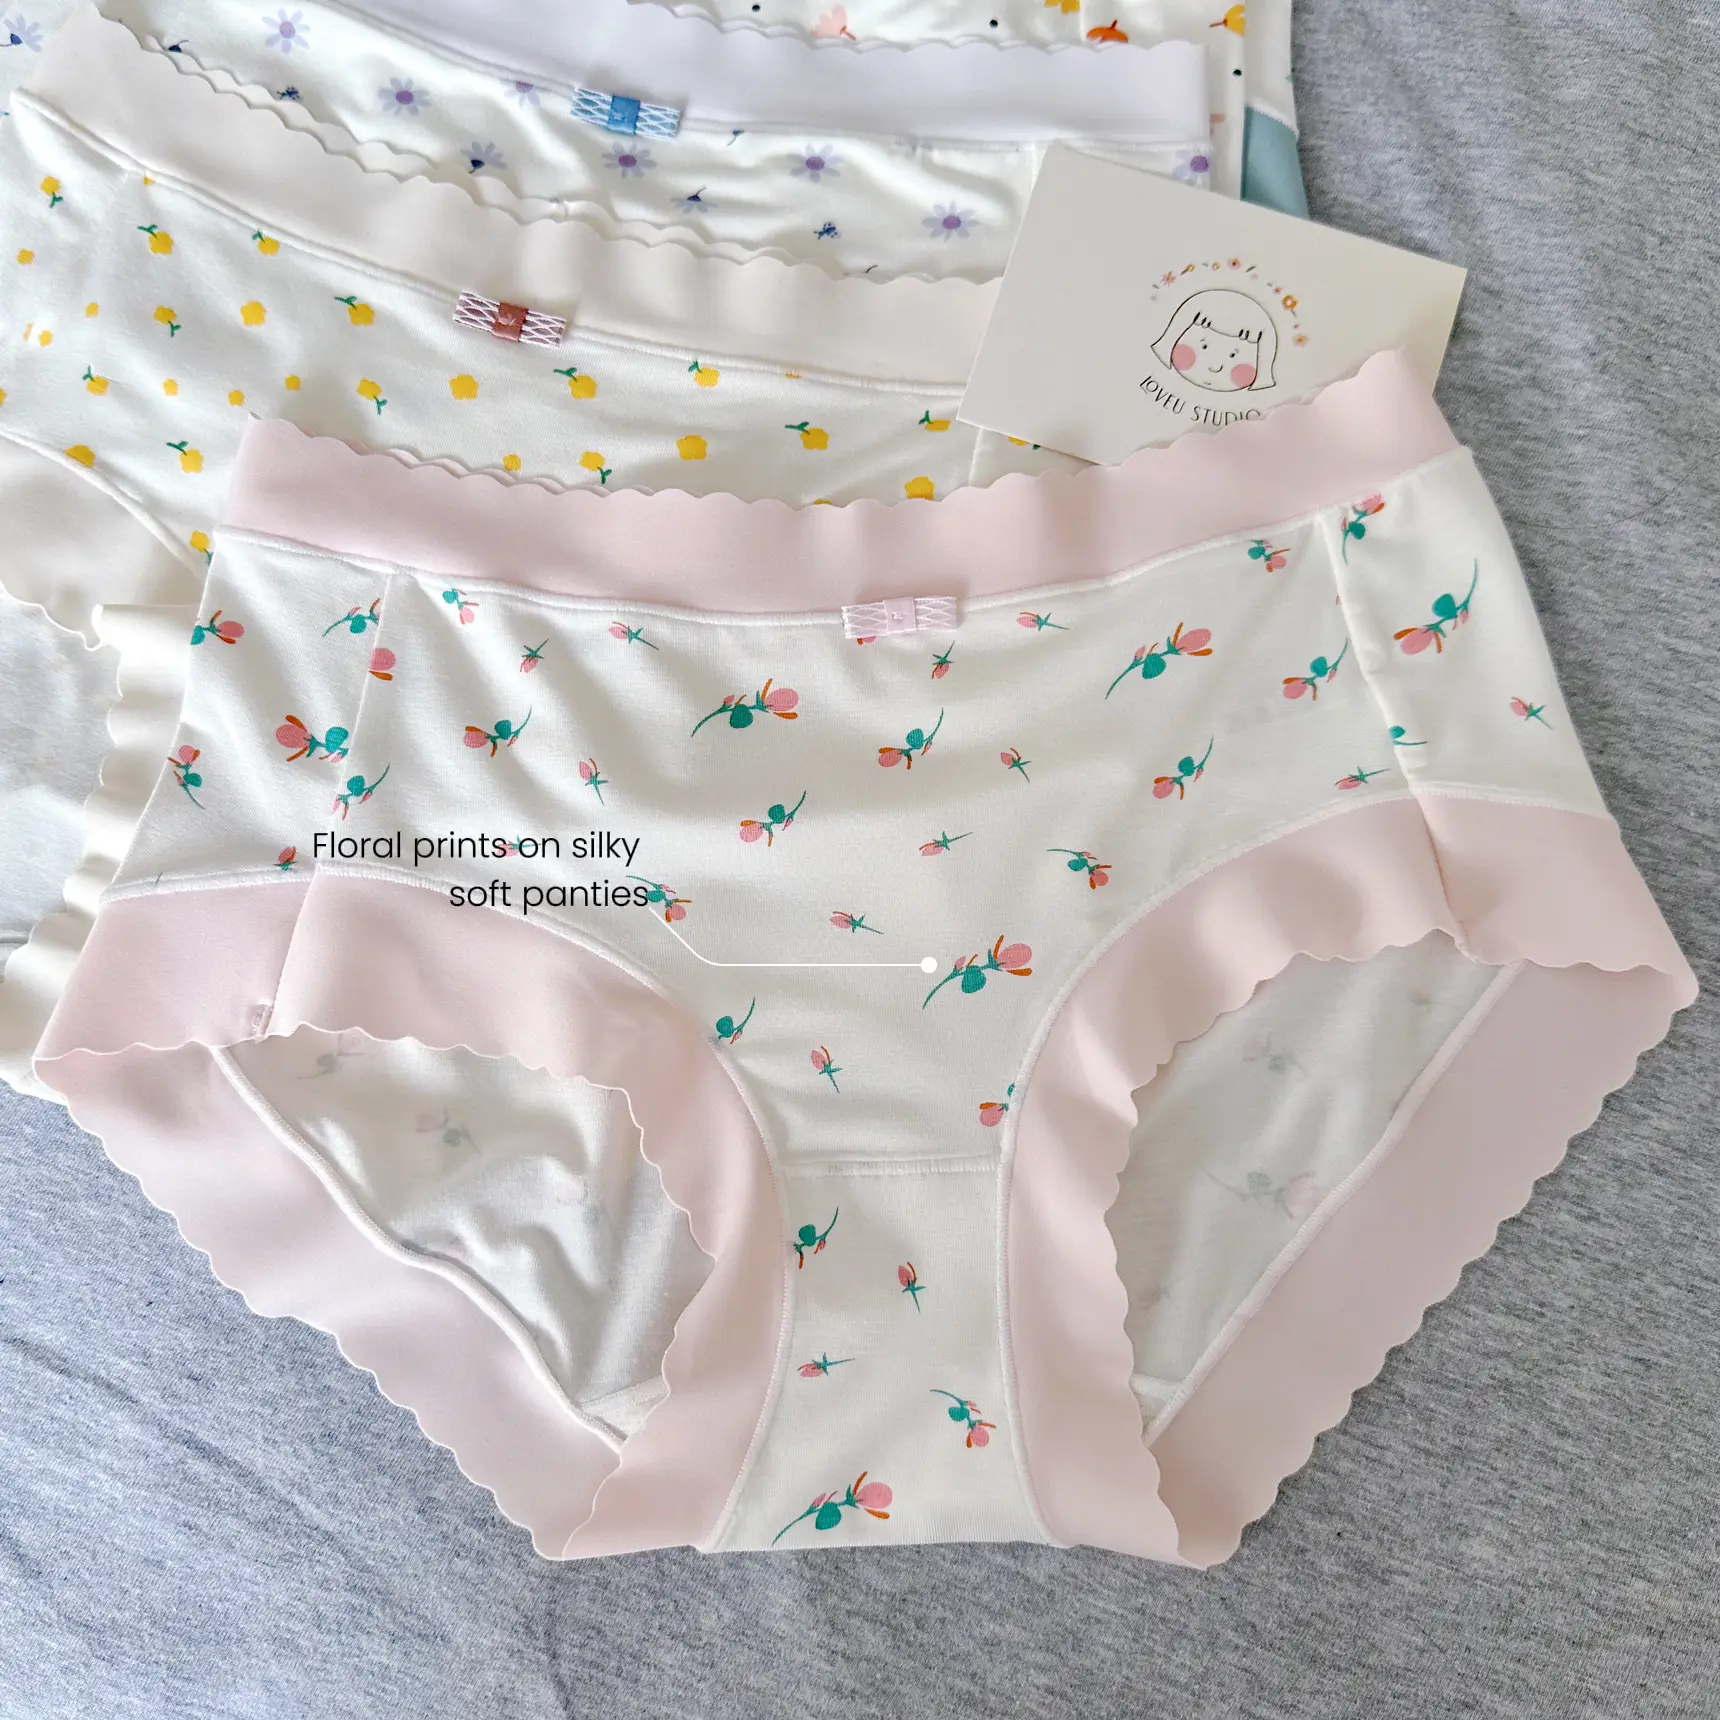 🇸🇬These panties are so cute🩲